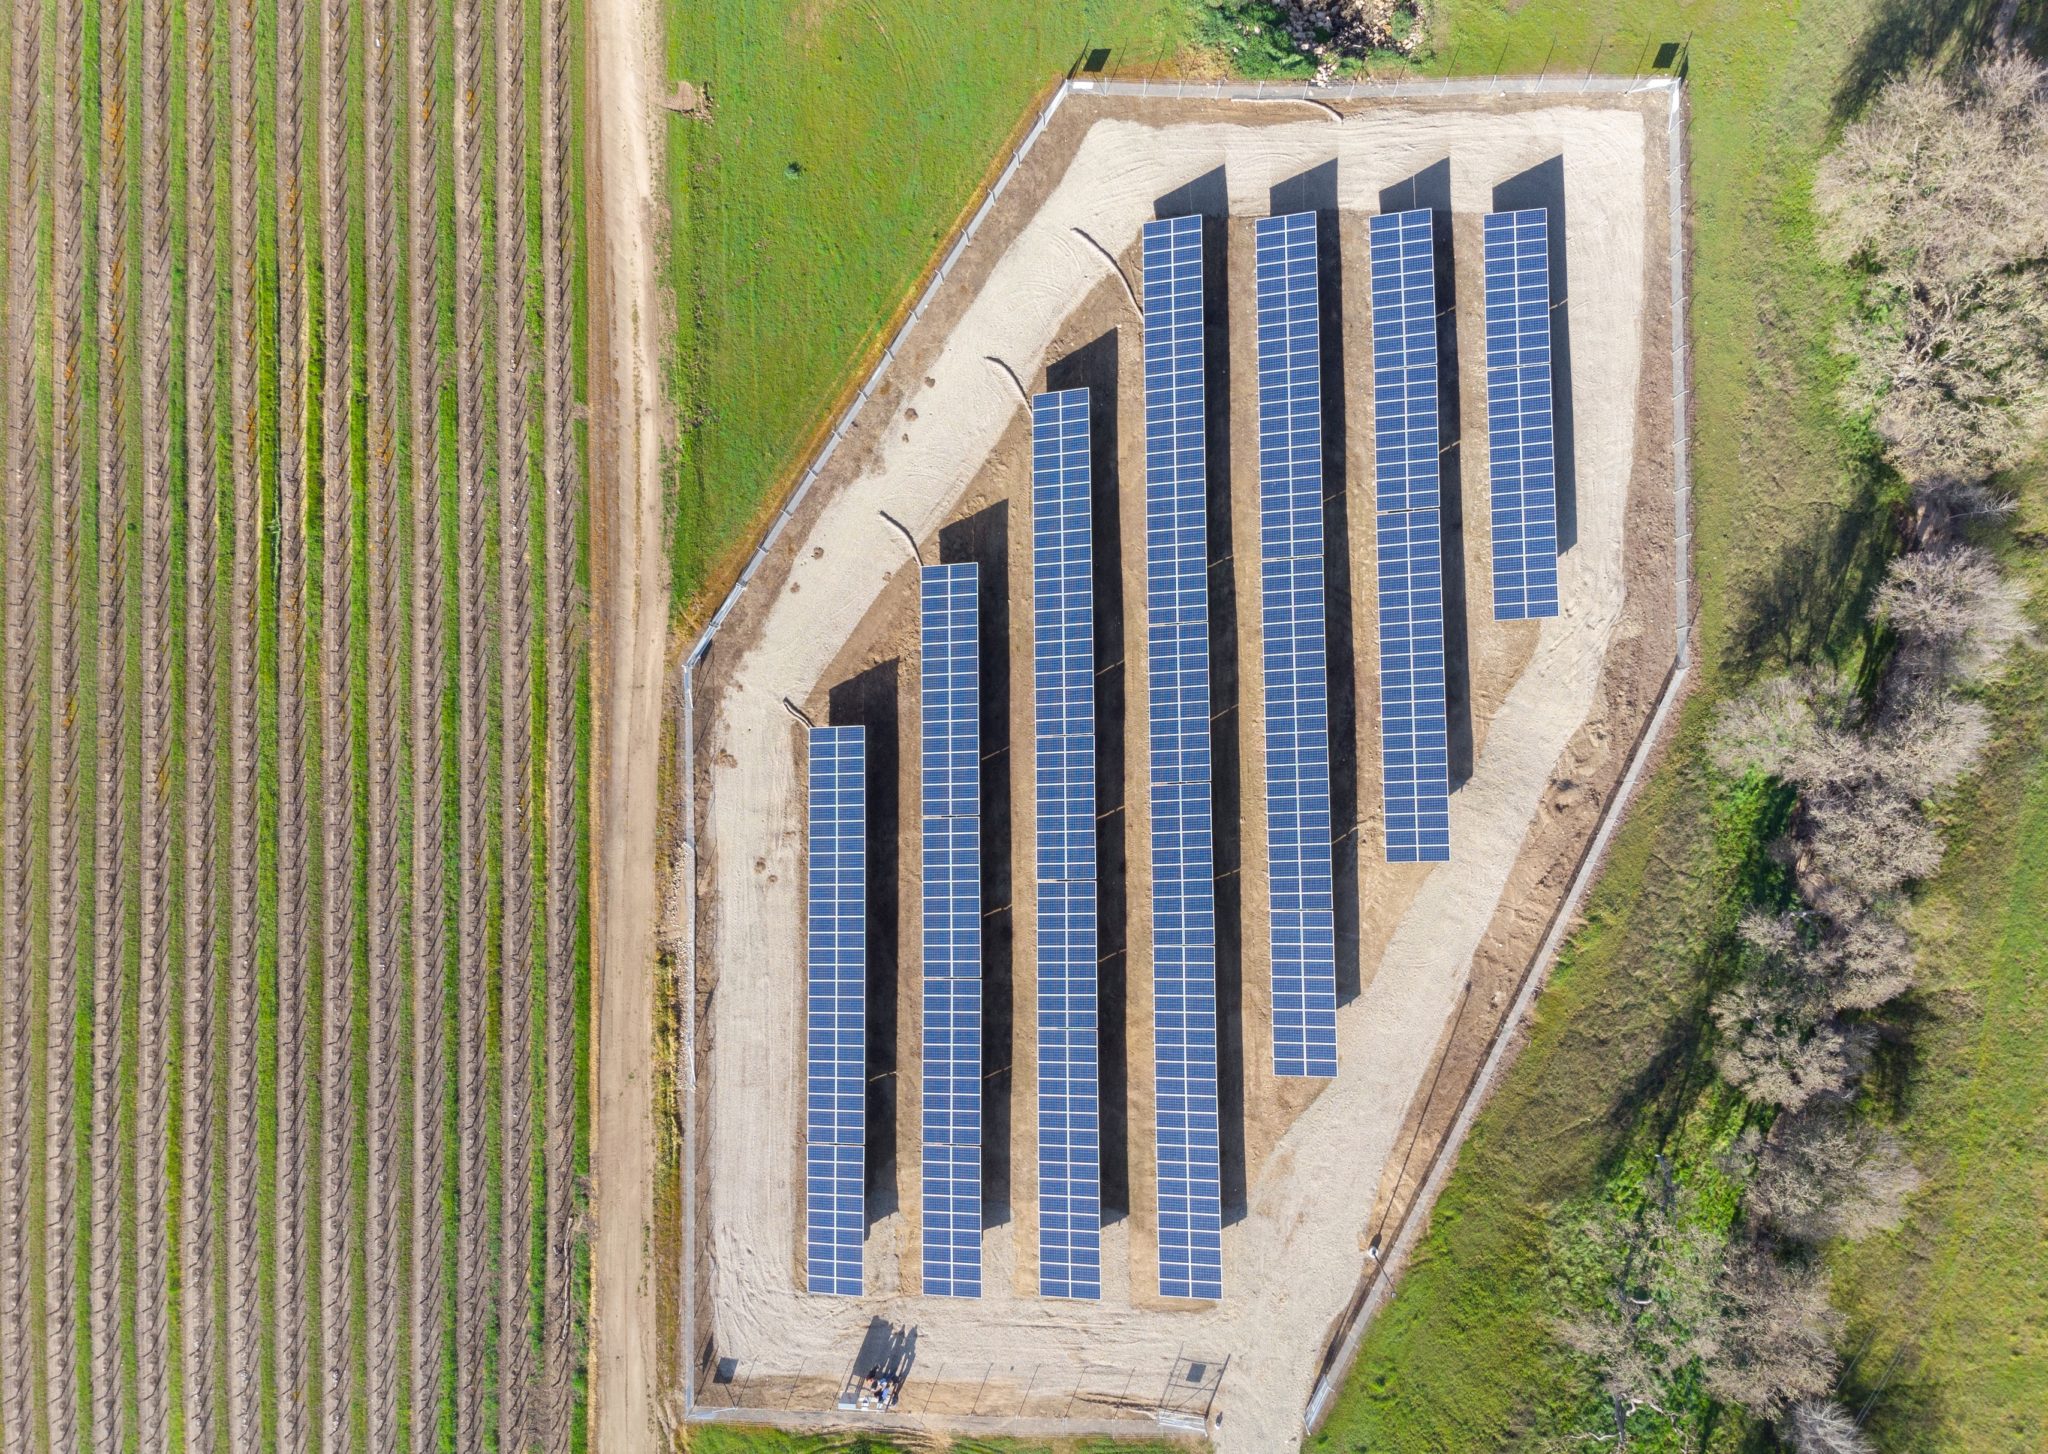 Aerial view of the solar installation at J. Lohr Vineyards & Wines in Paso Robles, California.